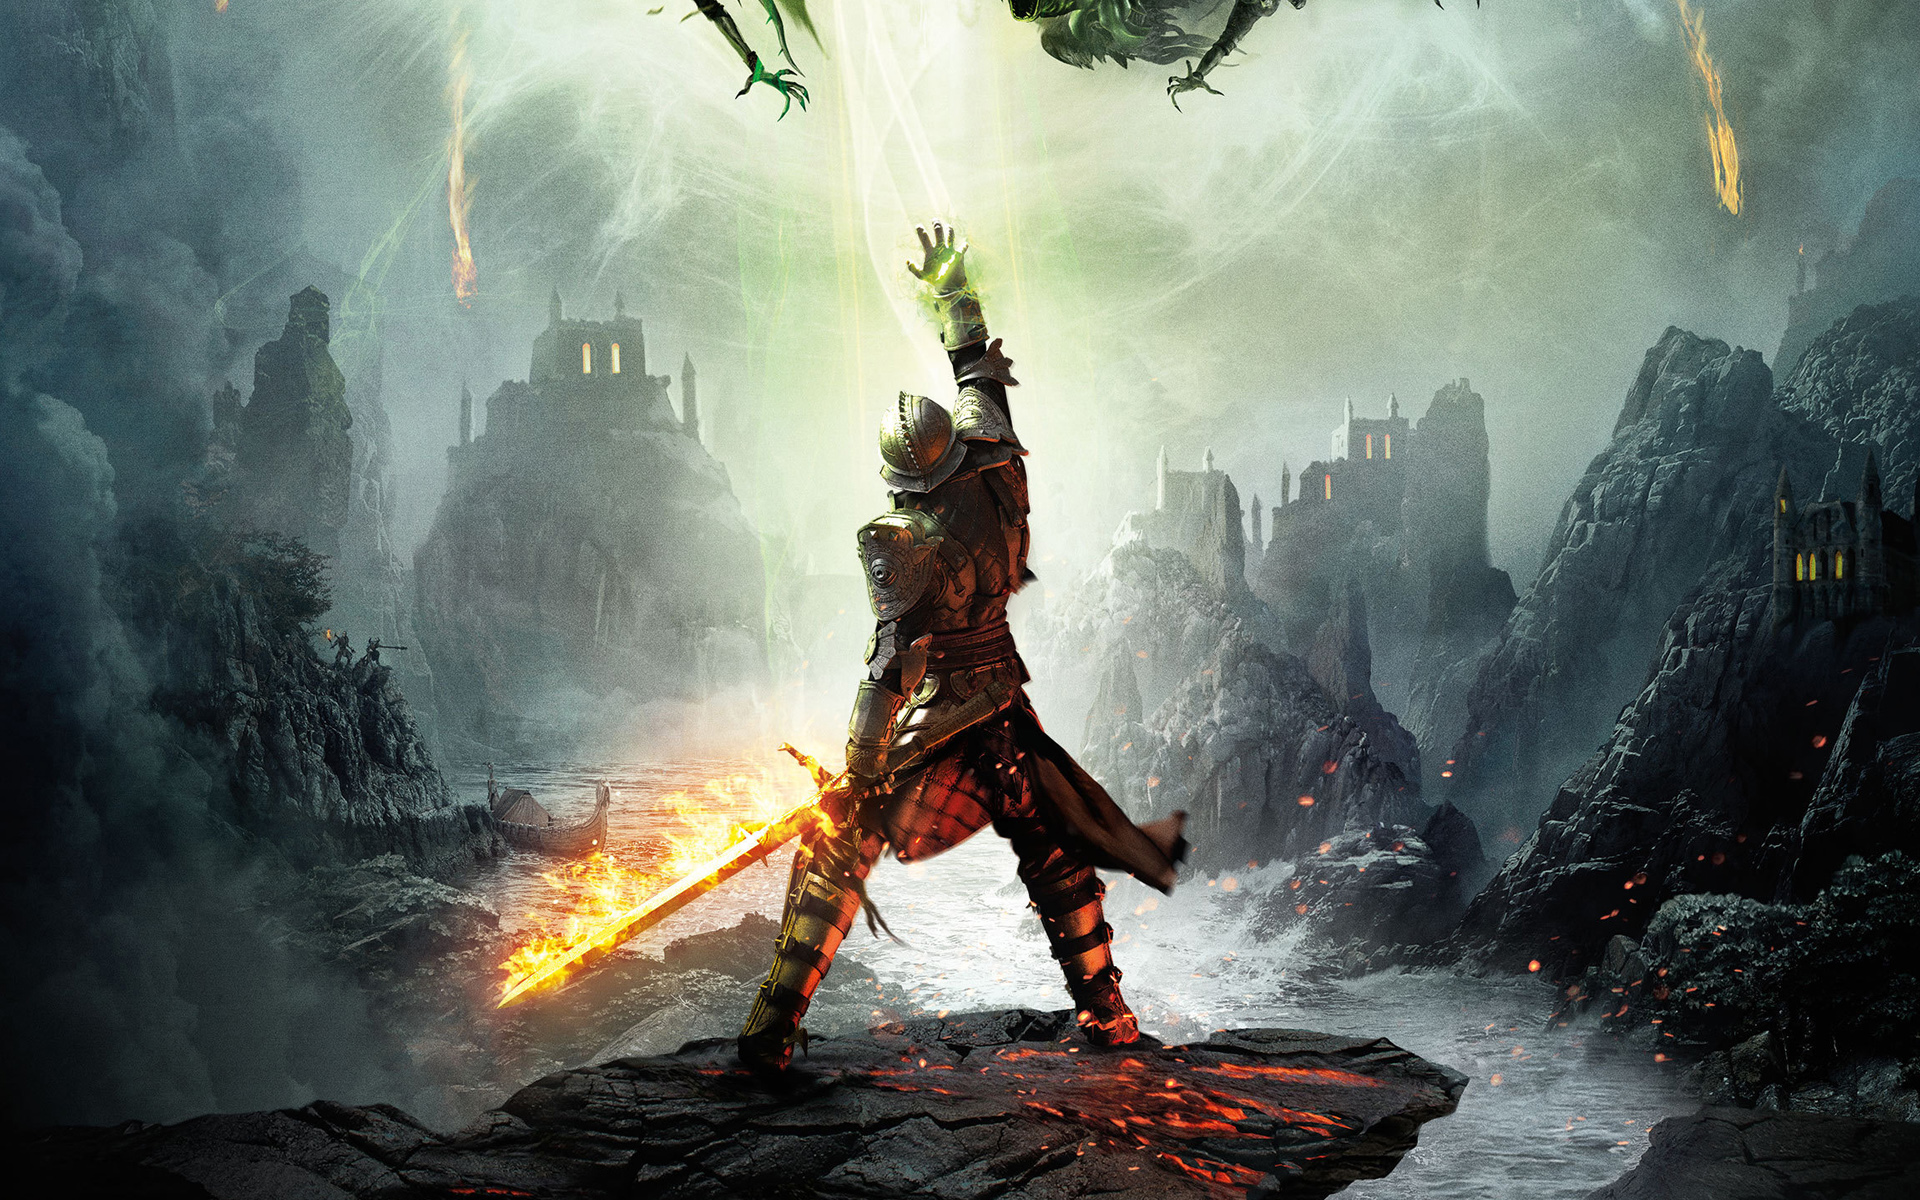 watch-the-new-trailers-for-dragon-age-inquisition-news-pc-gamers-mod-db